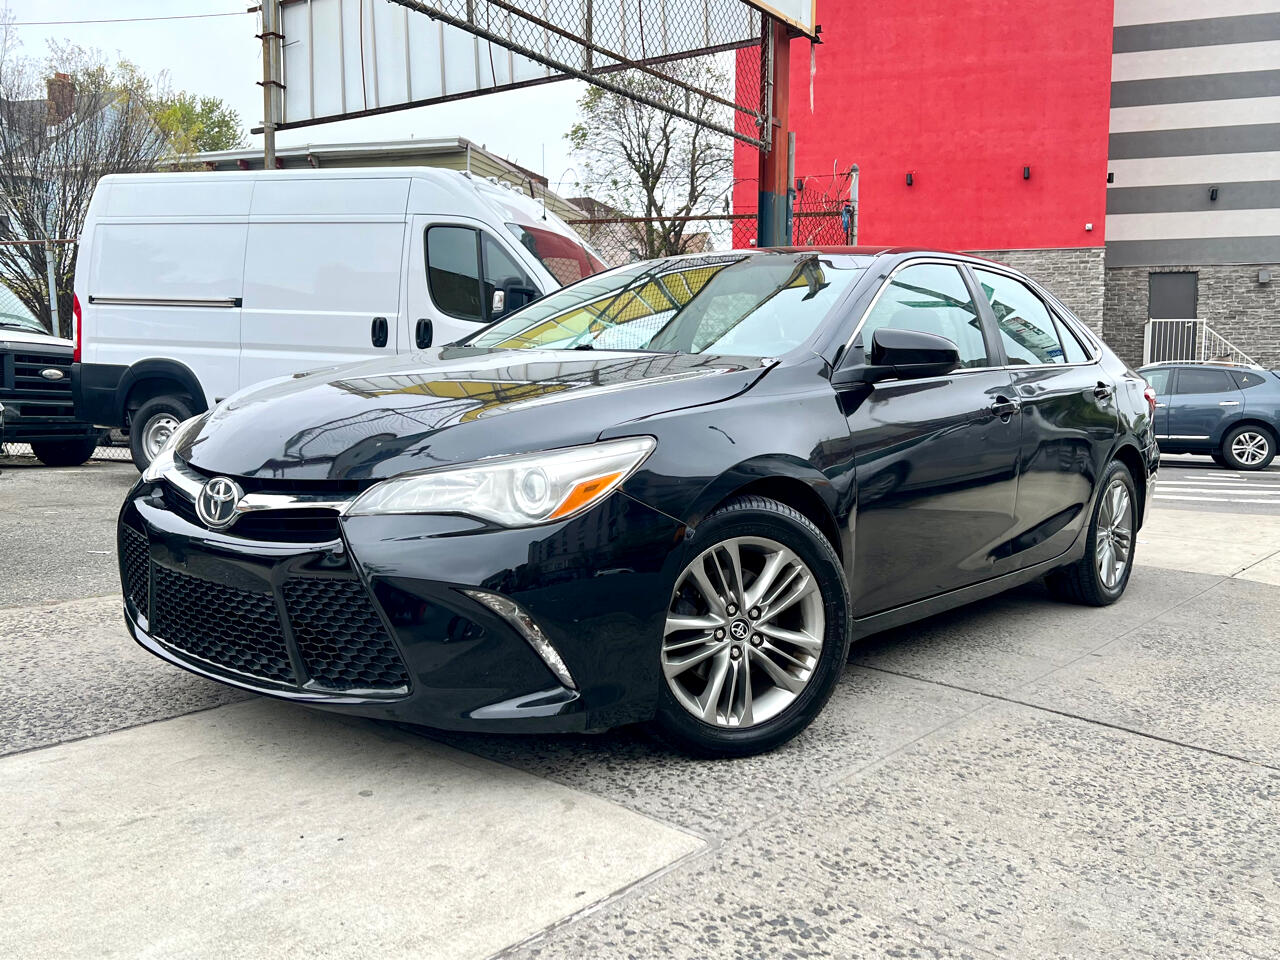 2015 Toyota Camry 4dr Sdn I4 Auto XLE (Natl)